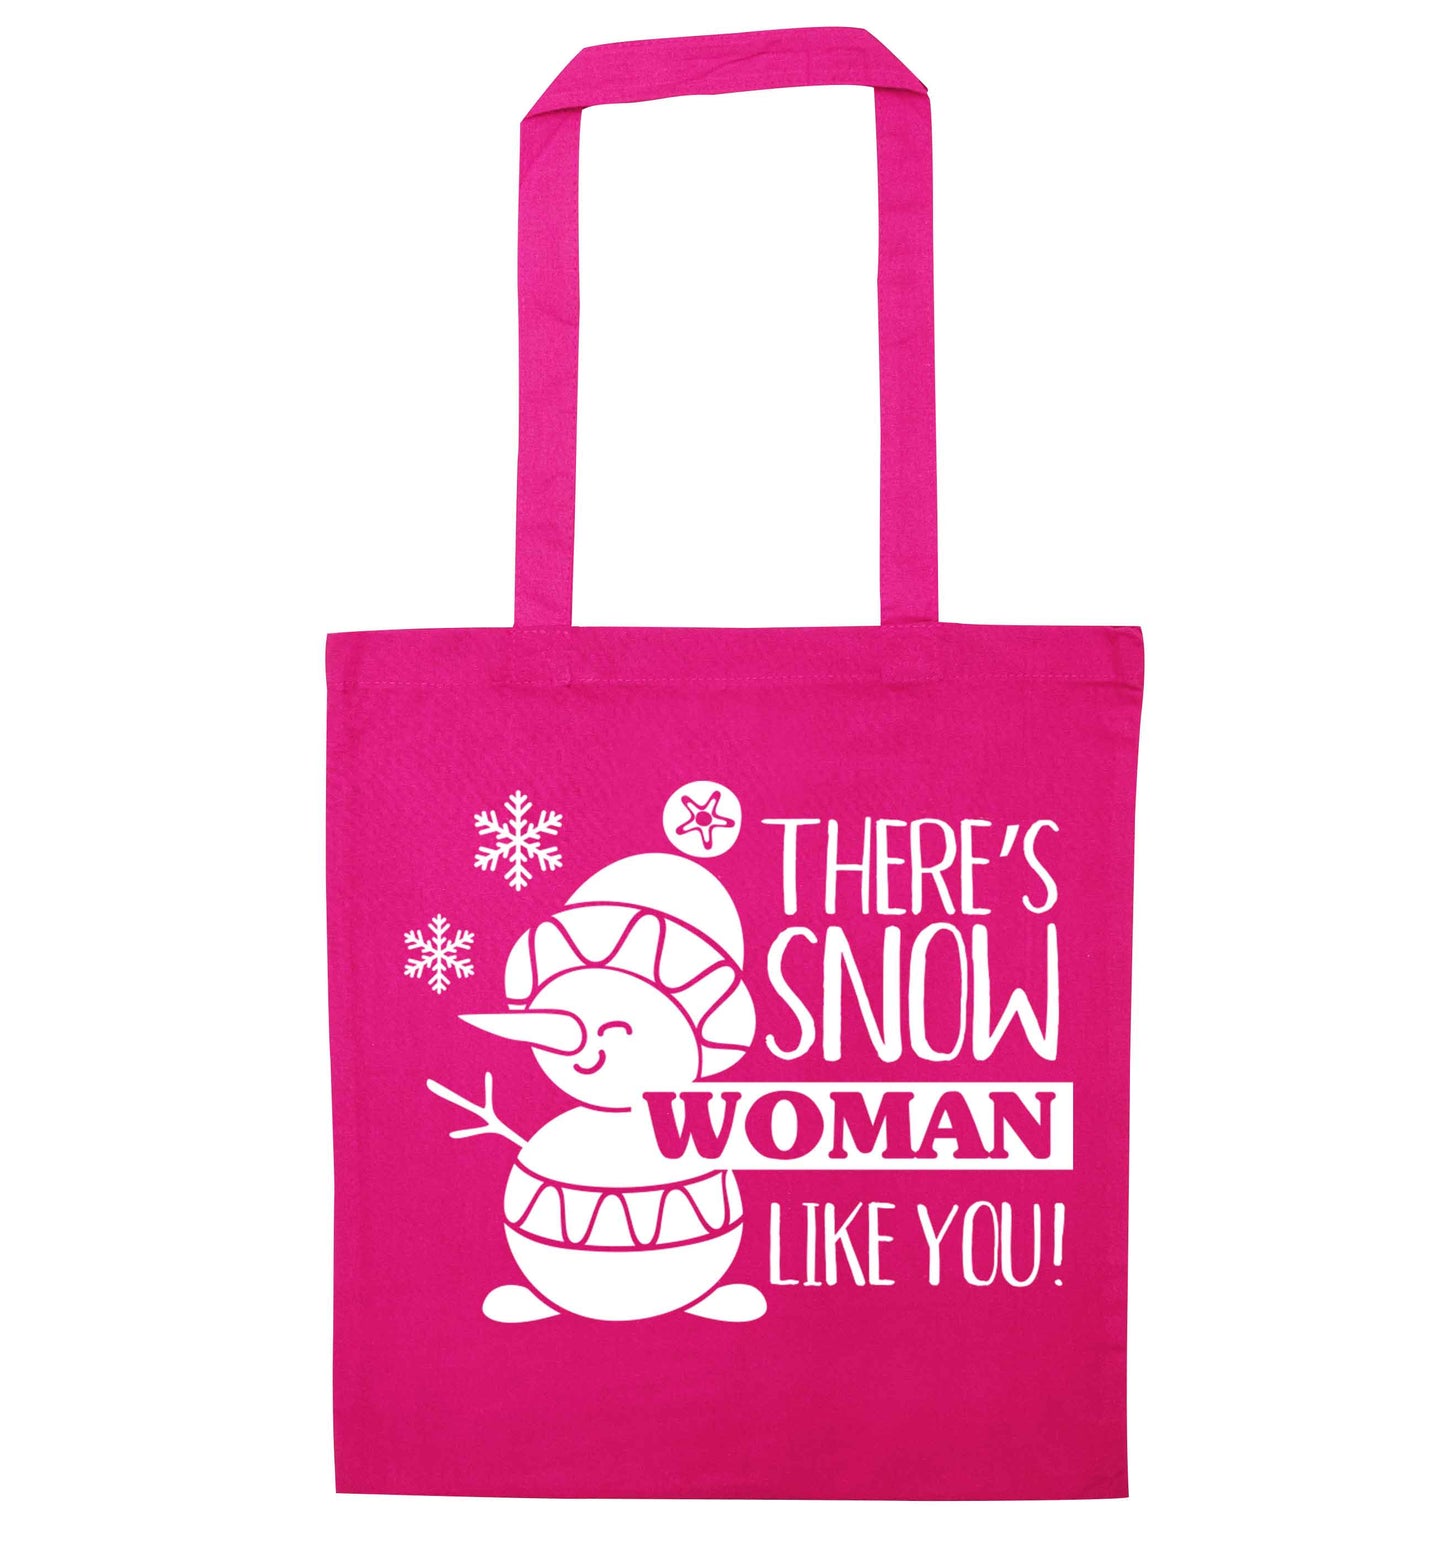 There's snow woman like you pink tote bag